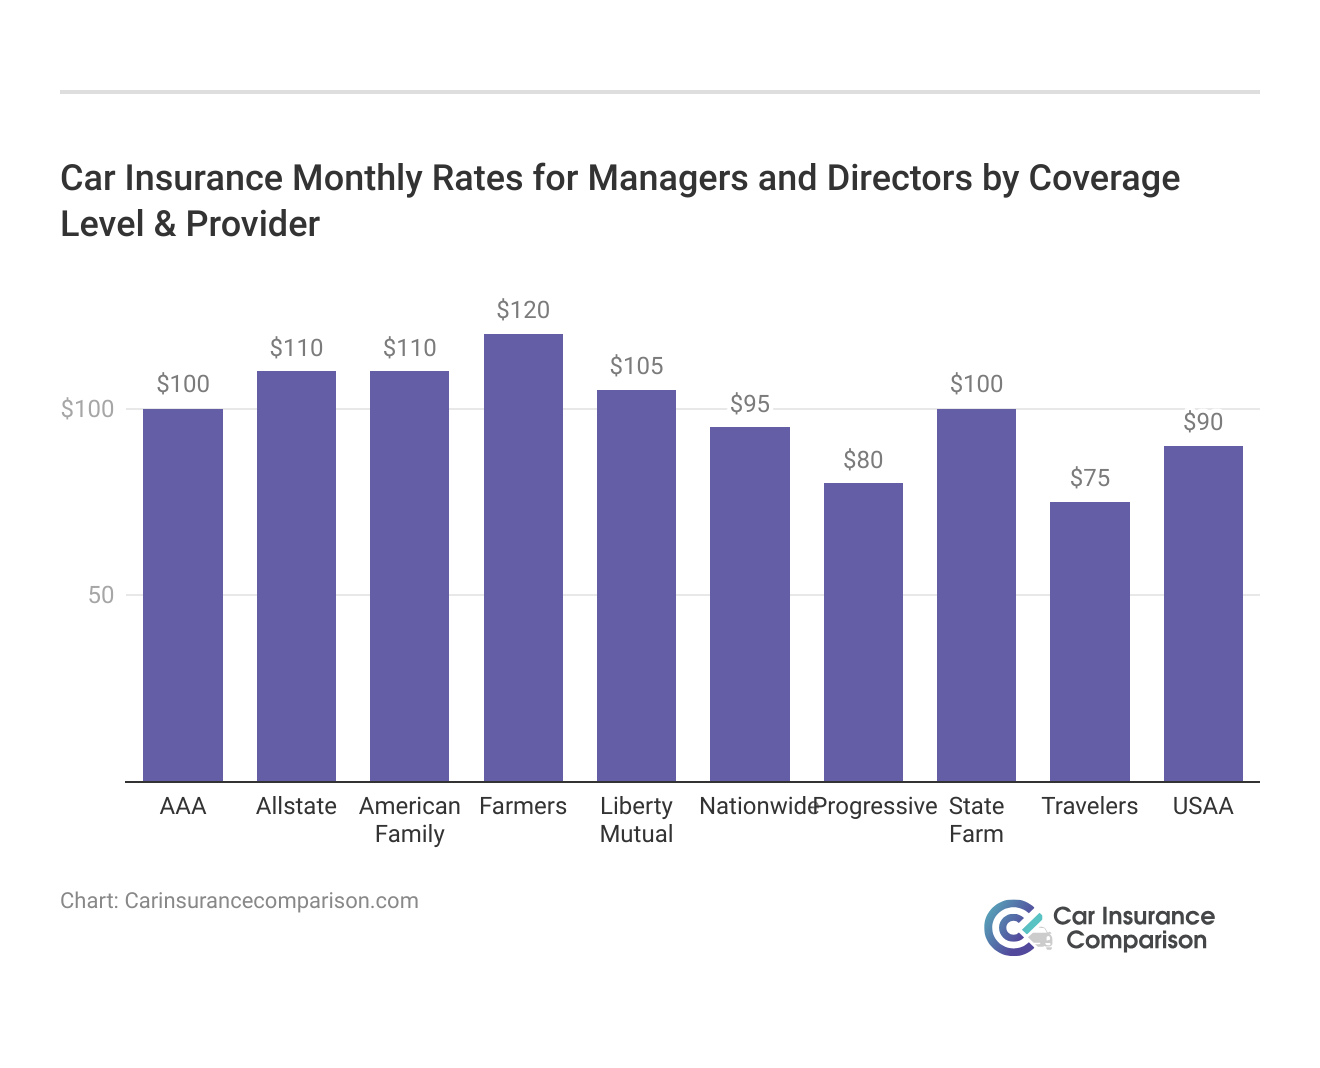 <h3>Car Insurance Monthly Rates for Managers and Directors by Coverage Level & Provider</h3>